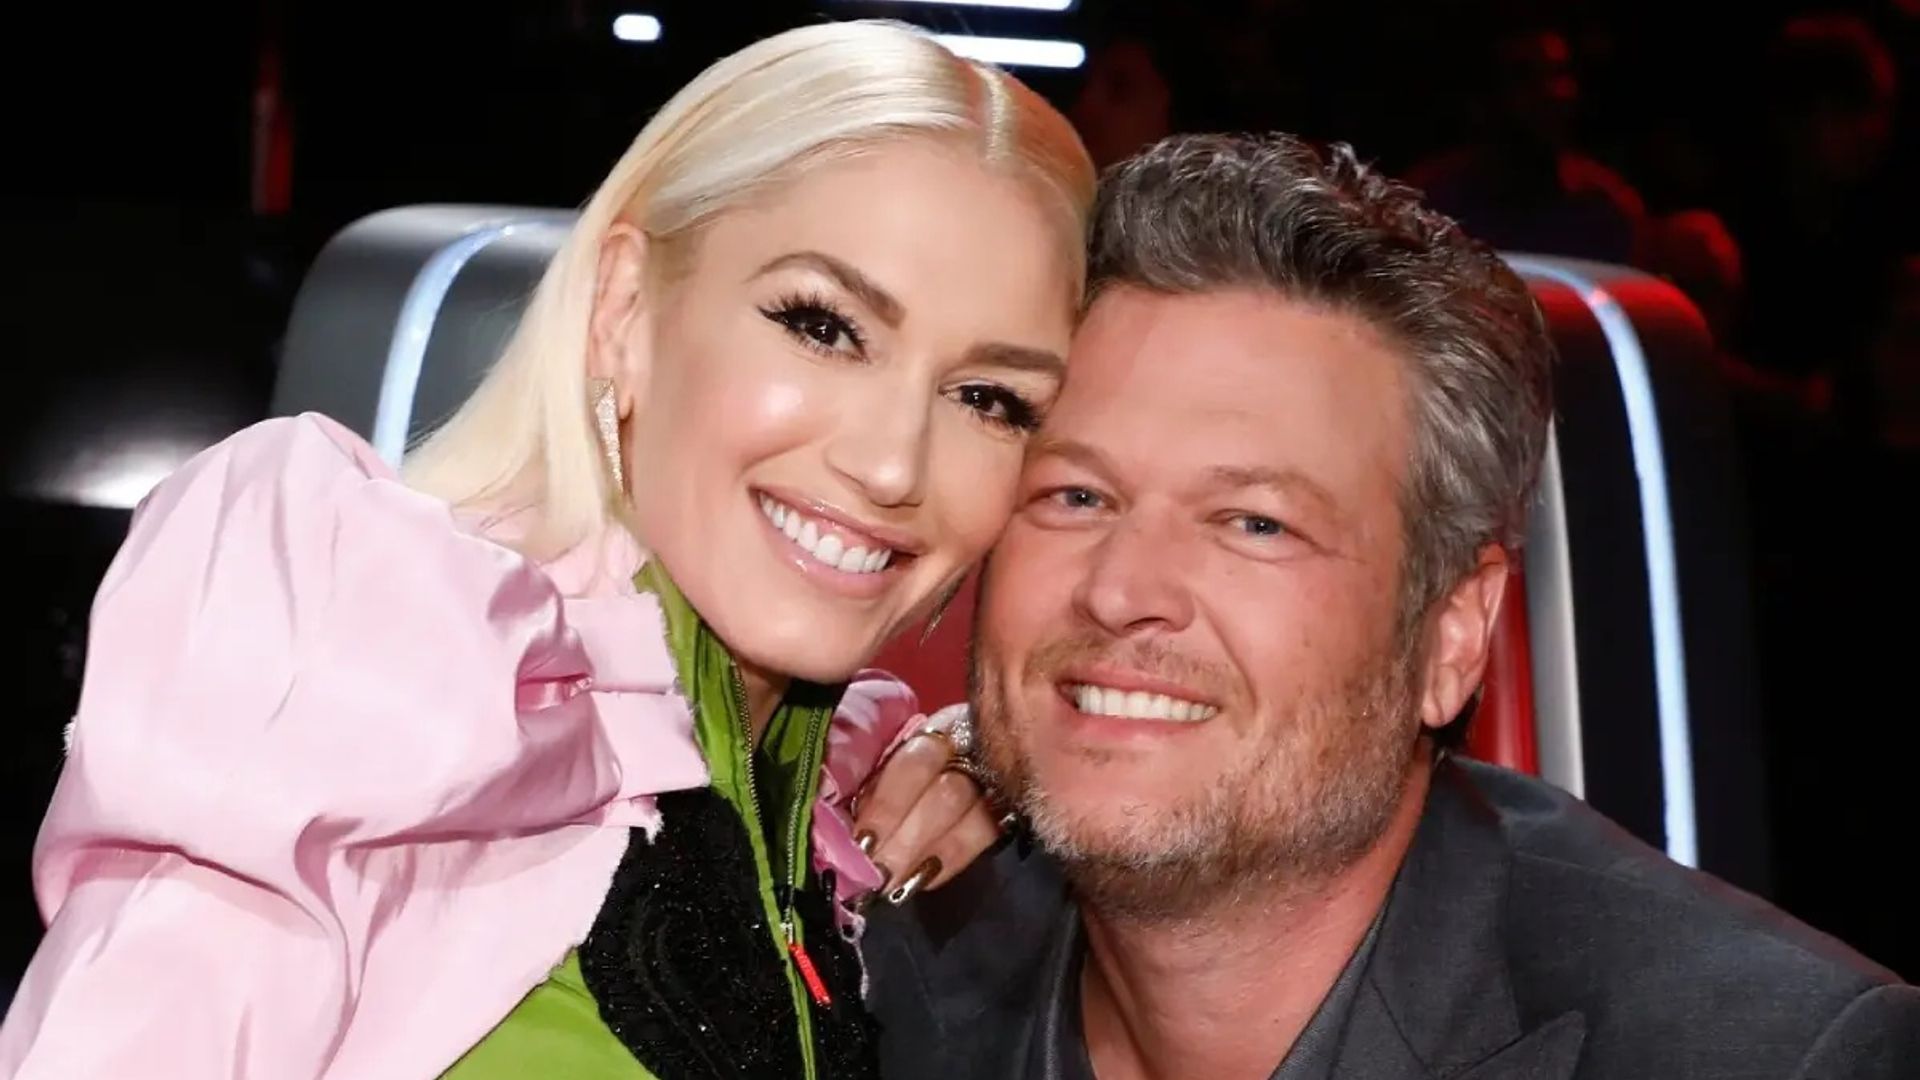 Blake Shelton pays tribute to wife Gwen Stefani with sweet new video